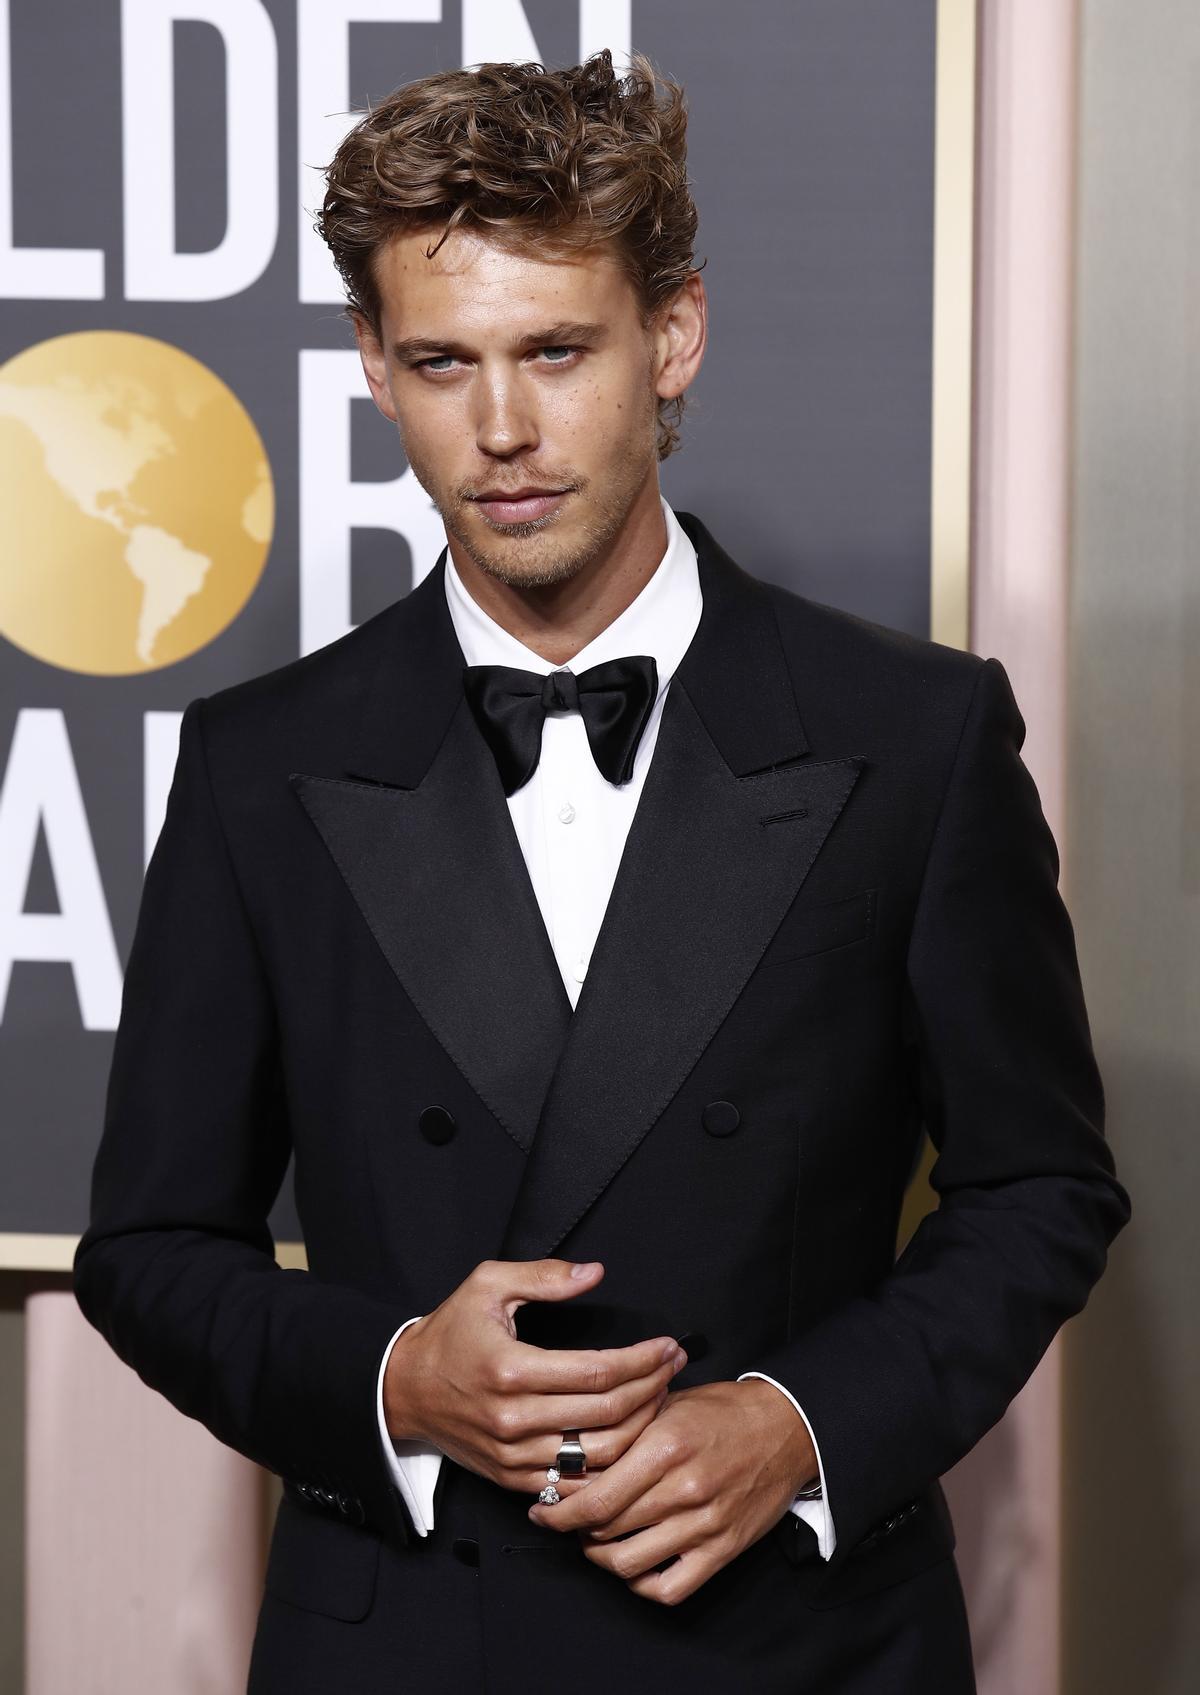 Beverly Hills (United States), 10/01/2023.- Austin Butler arrives for the 80th annual Golden Globe Awards ceremony at the Beverly Hilton Hotel, in Beverly Hills, California, USA, 10 January 2023. Artists in various film and television categories are awarded Golden Globes by the Hollywood Foreign Press Association. (Estados Unidos) EFE/EPA/CAROLINE BREHMAN